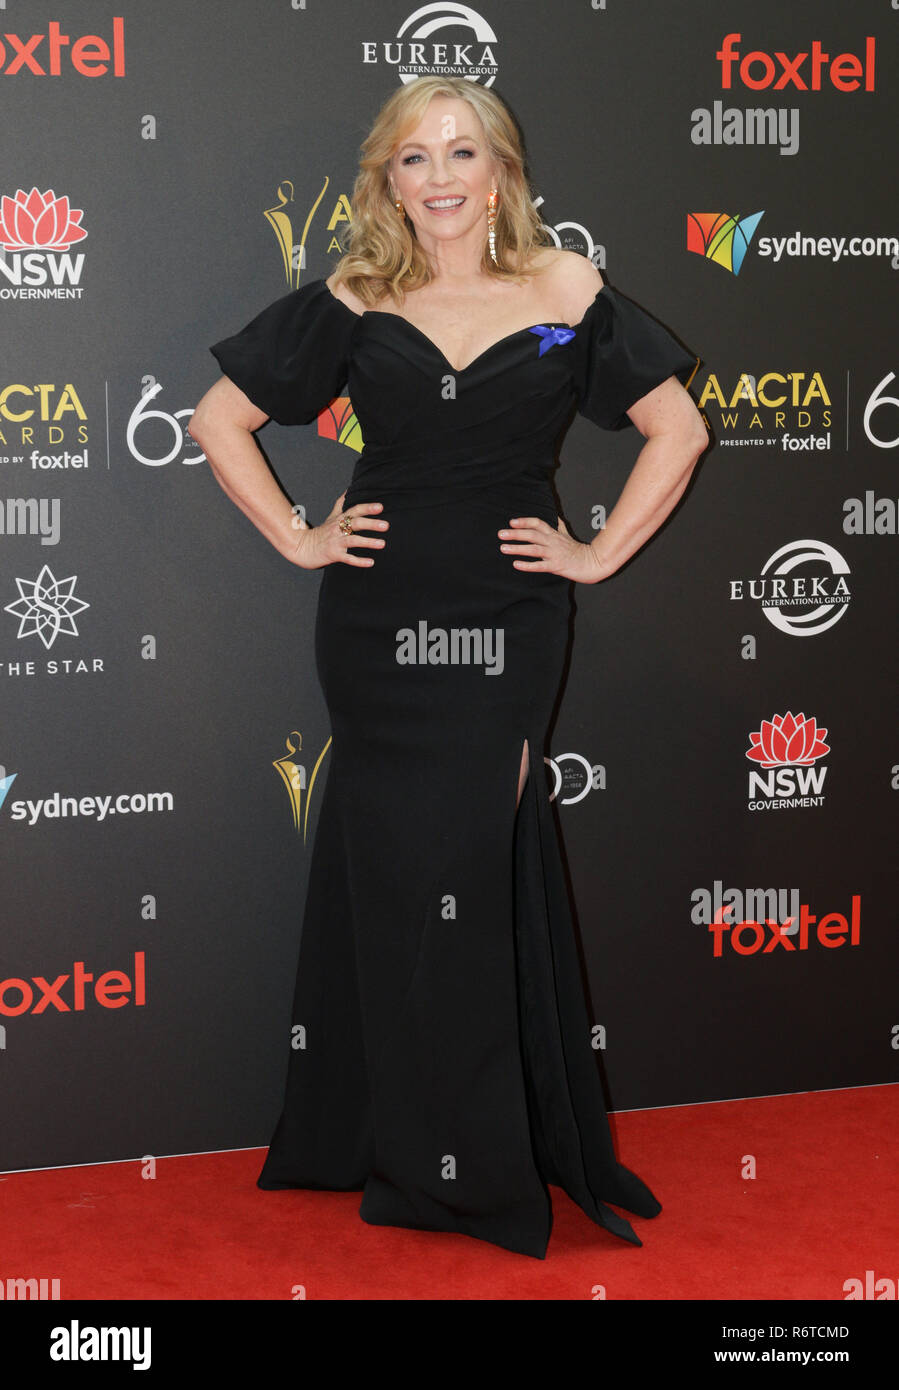 Sydney, NSW, Australia. 5th Dec, 2018. Rebecca Gibney seen on the red carpet during the 60th AACTA Awards in Sydney. Credit: Belinda Vel/SOPA Images/ZUMA Wire/Alamy Live News Stock Photo